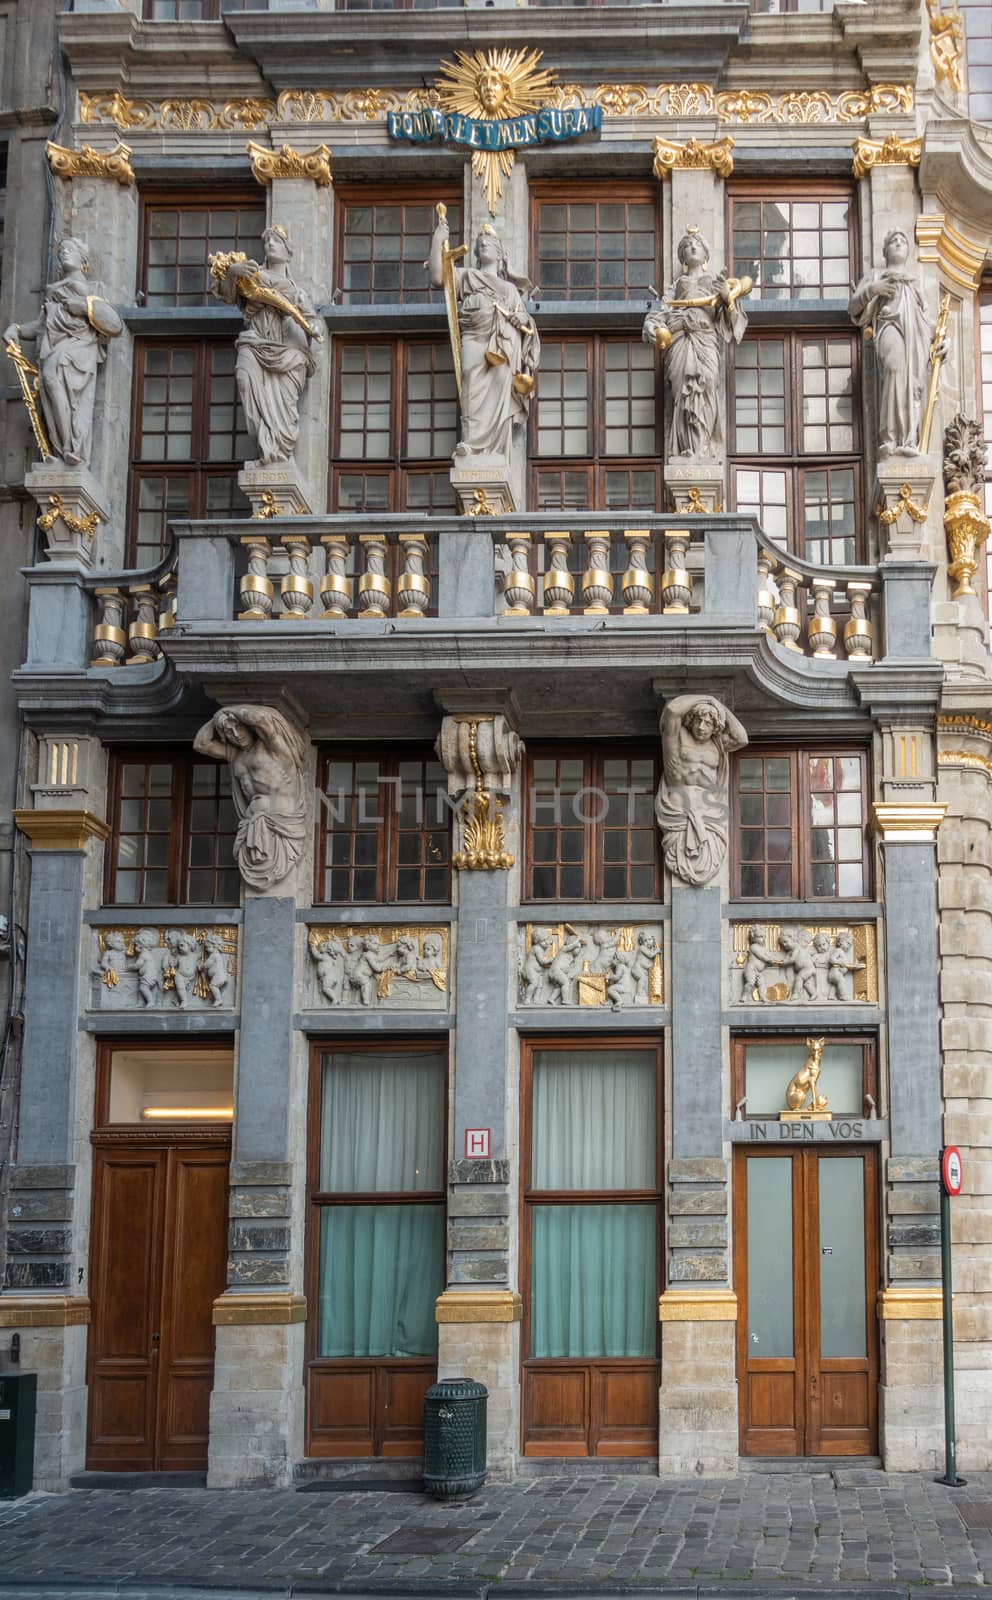 Brussels, Belgium - September 26, 2018: In Den Vos mansion on the Grand Place, Grote Markt, with goddess statues and golden decorations and Newton observation Pondere Et Mensura.